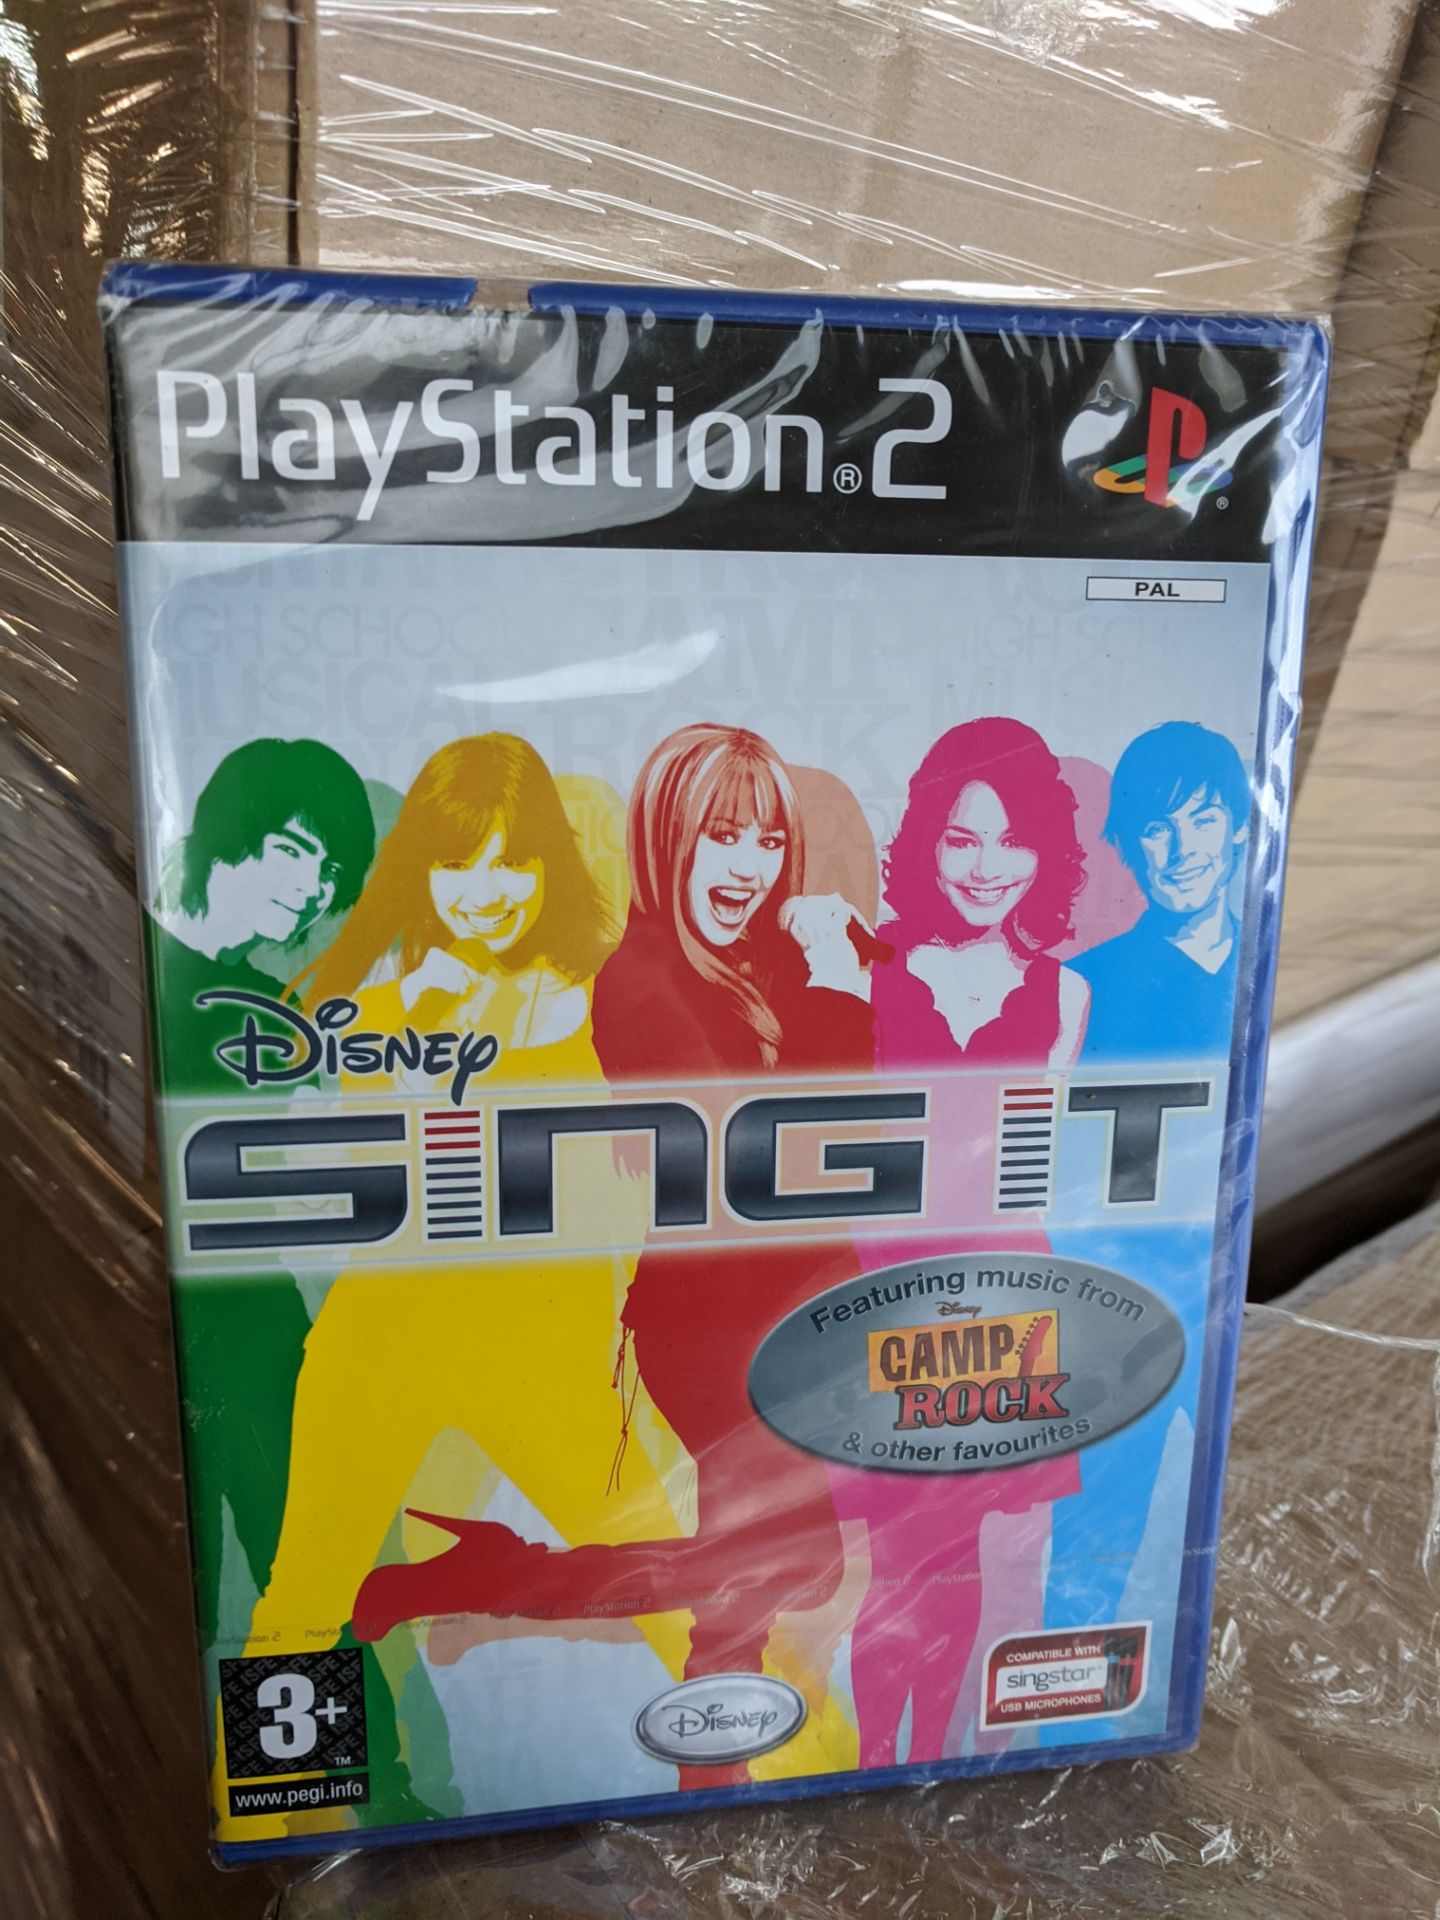 500pcs Brand new Sealed Sing it Dance PS2 Game - in original sealed cartons and packaging - original